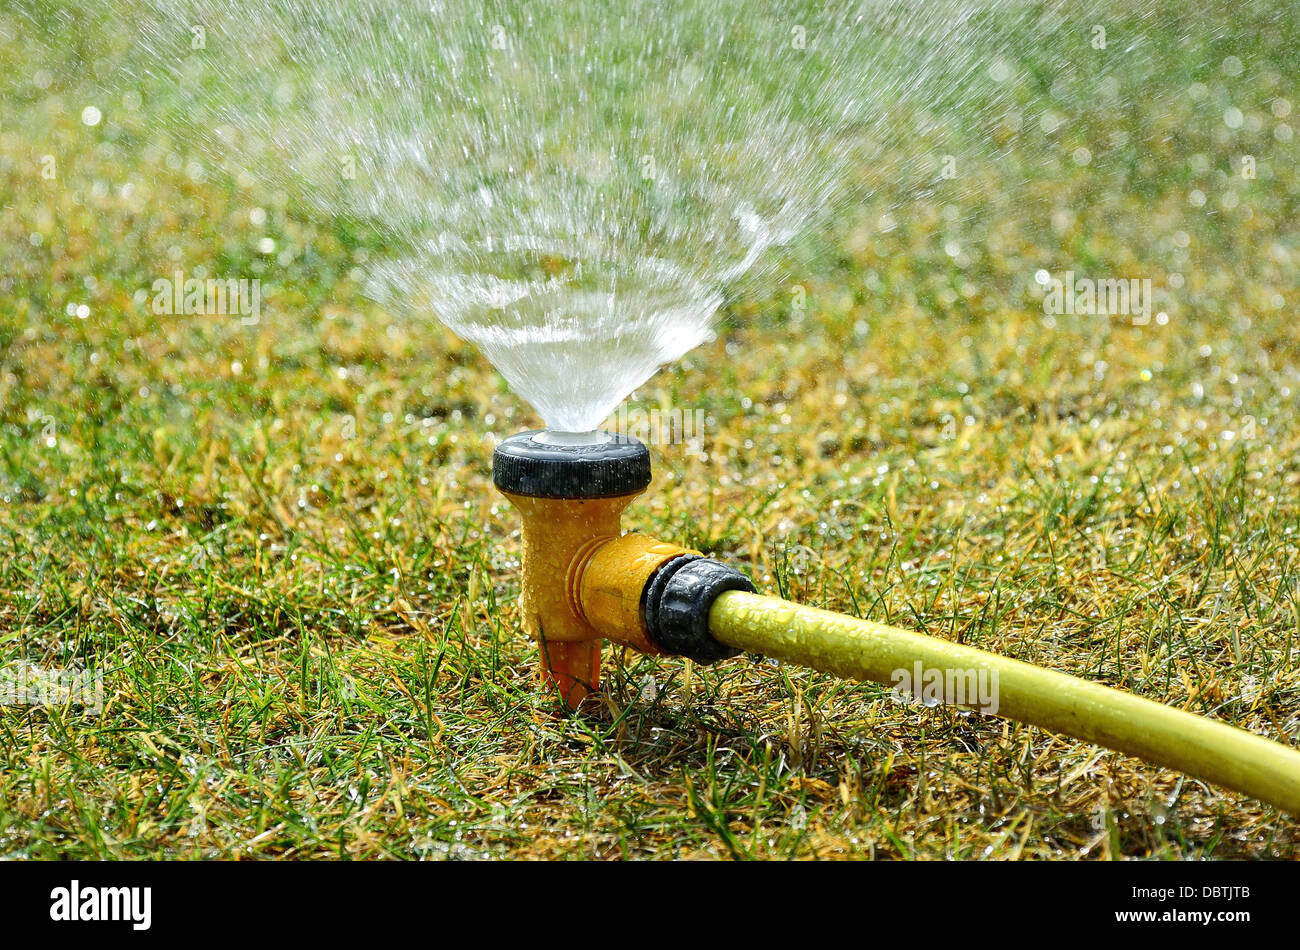 Close up of a garden sprinkler watering a lawn Stock Photo